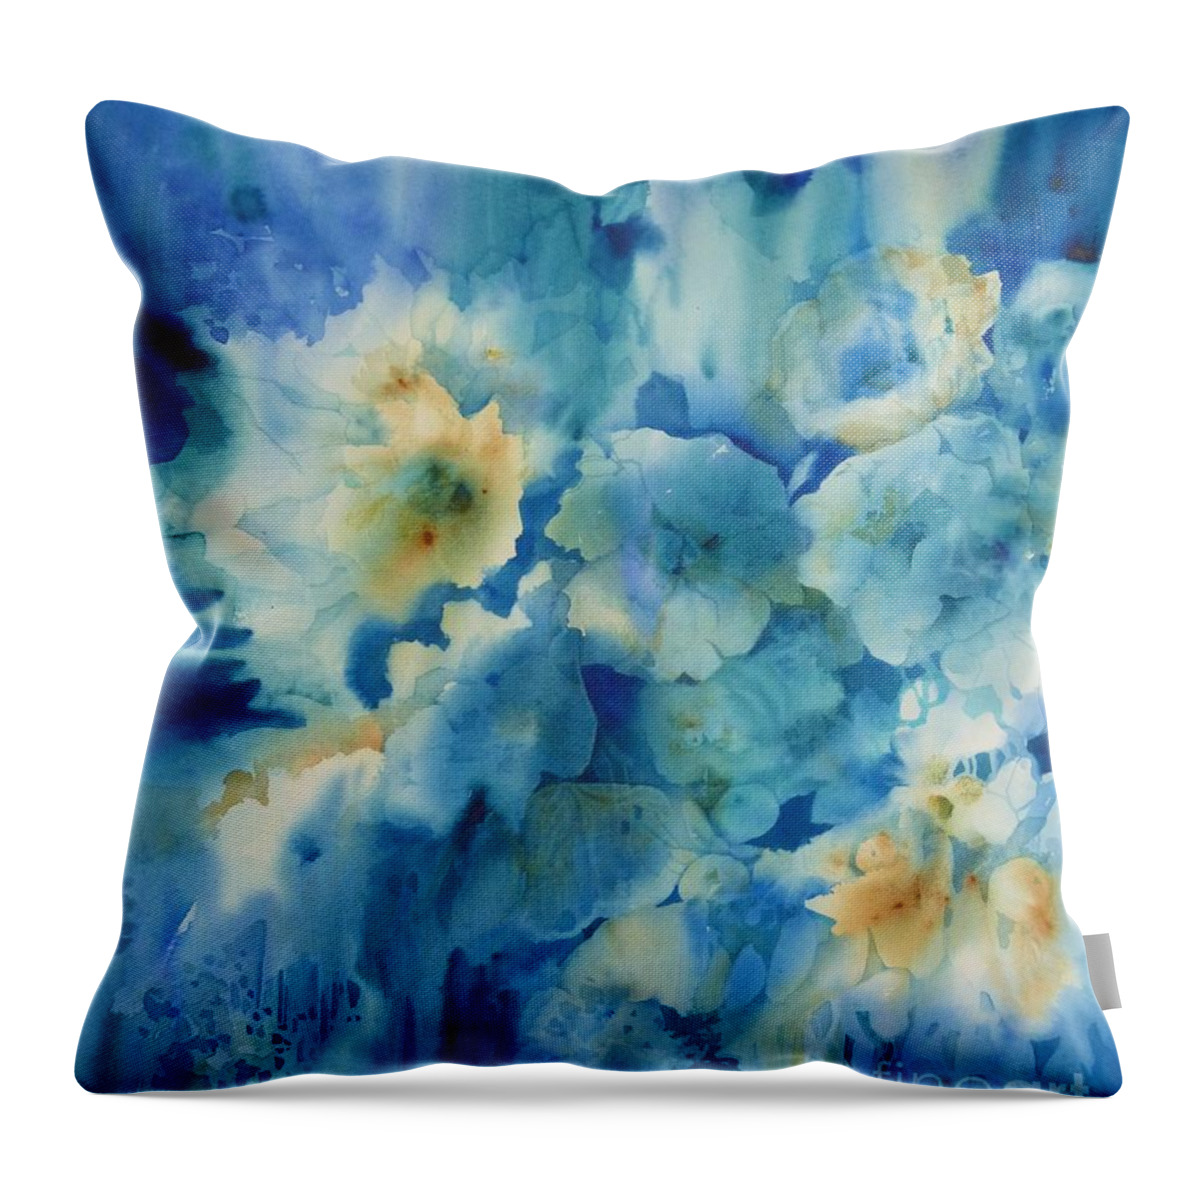 Flowers Throw Pillow featuring the painting Moonlit Flowers by Donna Acheson-Juillet